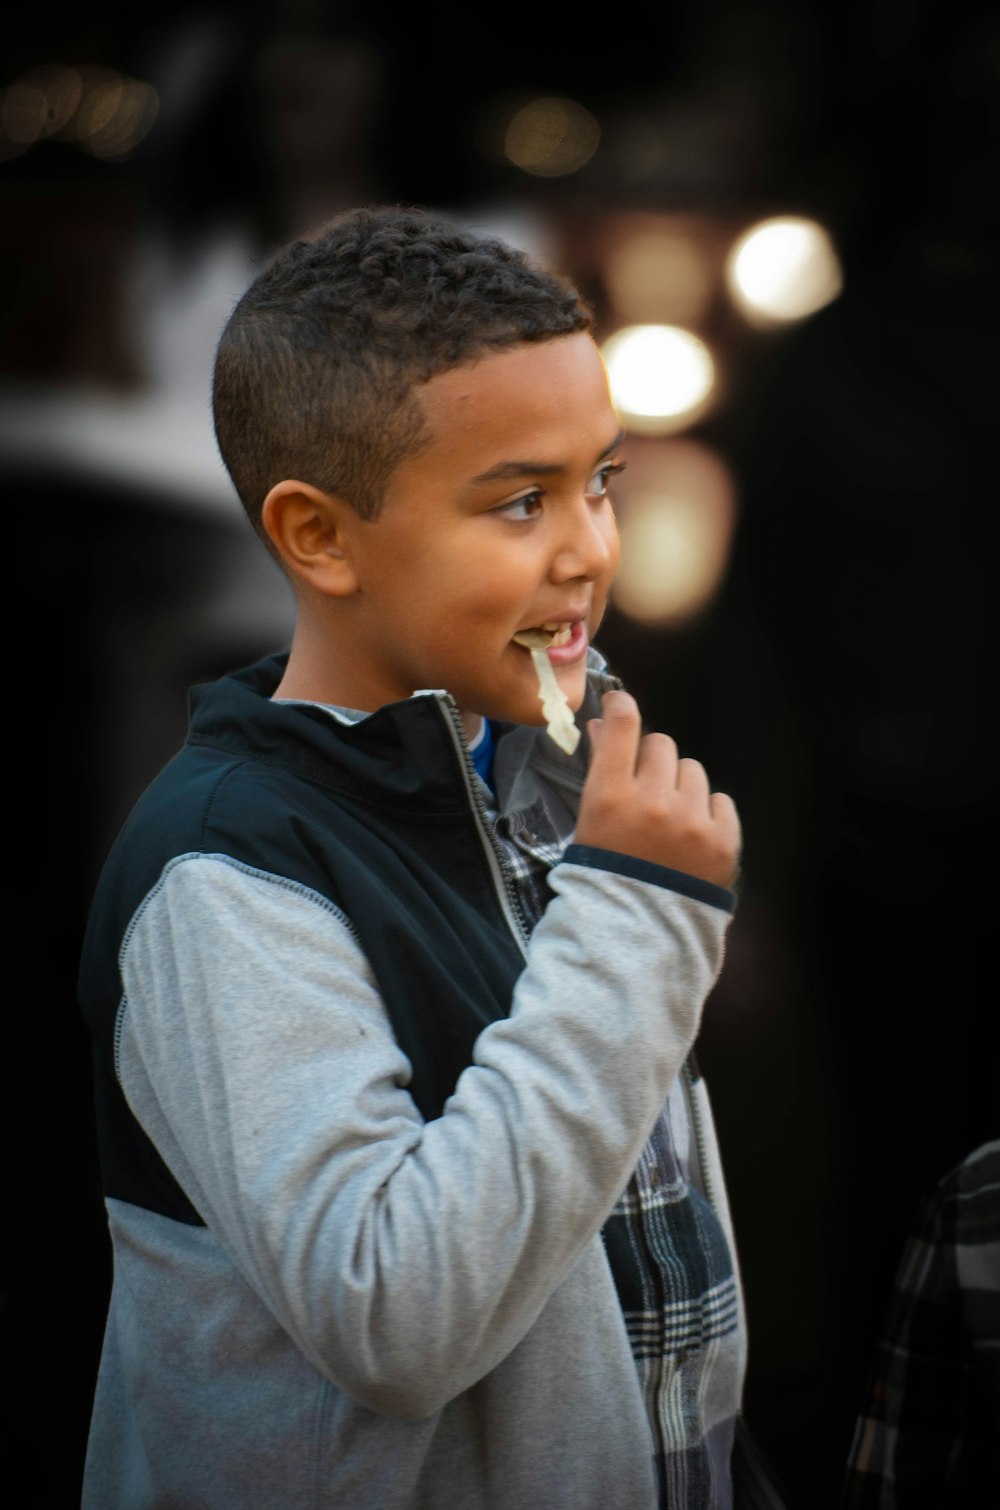 a young boy eating something with his hands